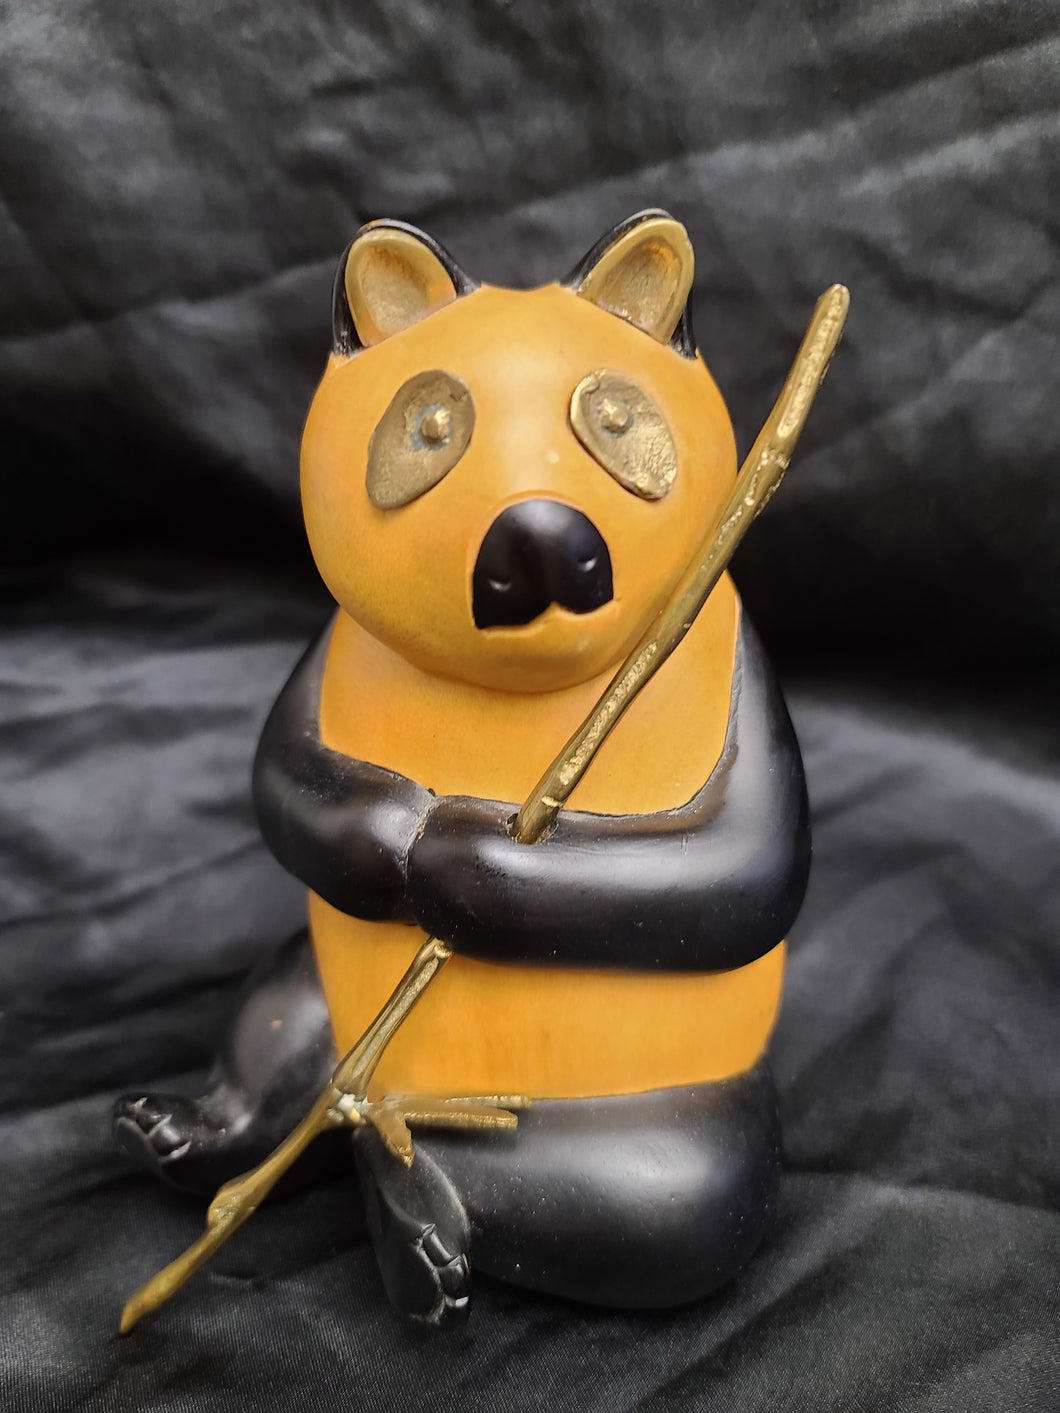 Vintage Wood Carve Panda Figurine with Brass Bamboo Stick, Brass Eyes and Ears